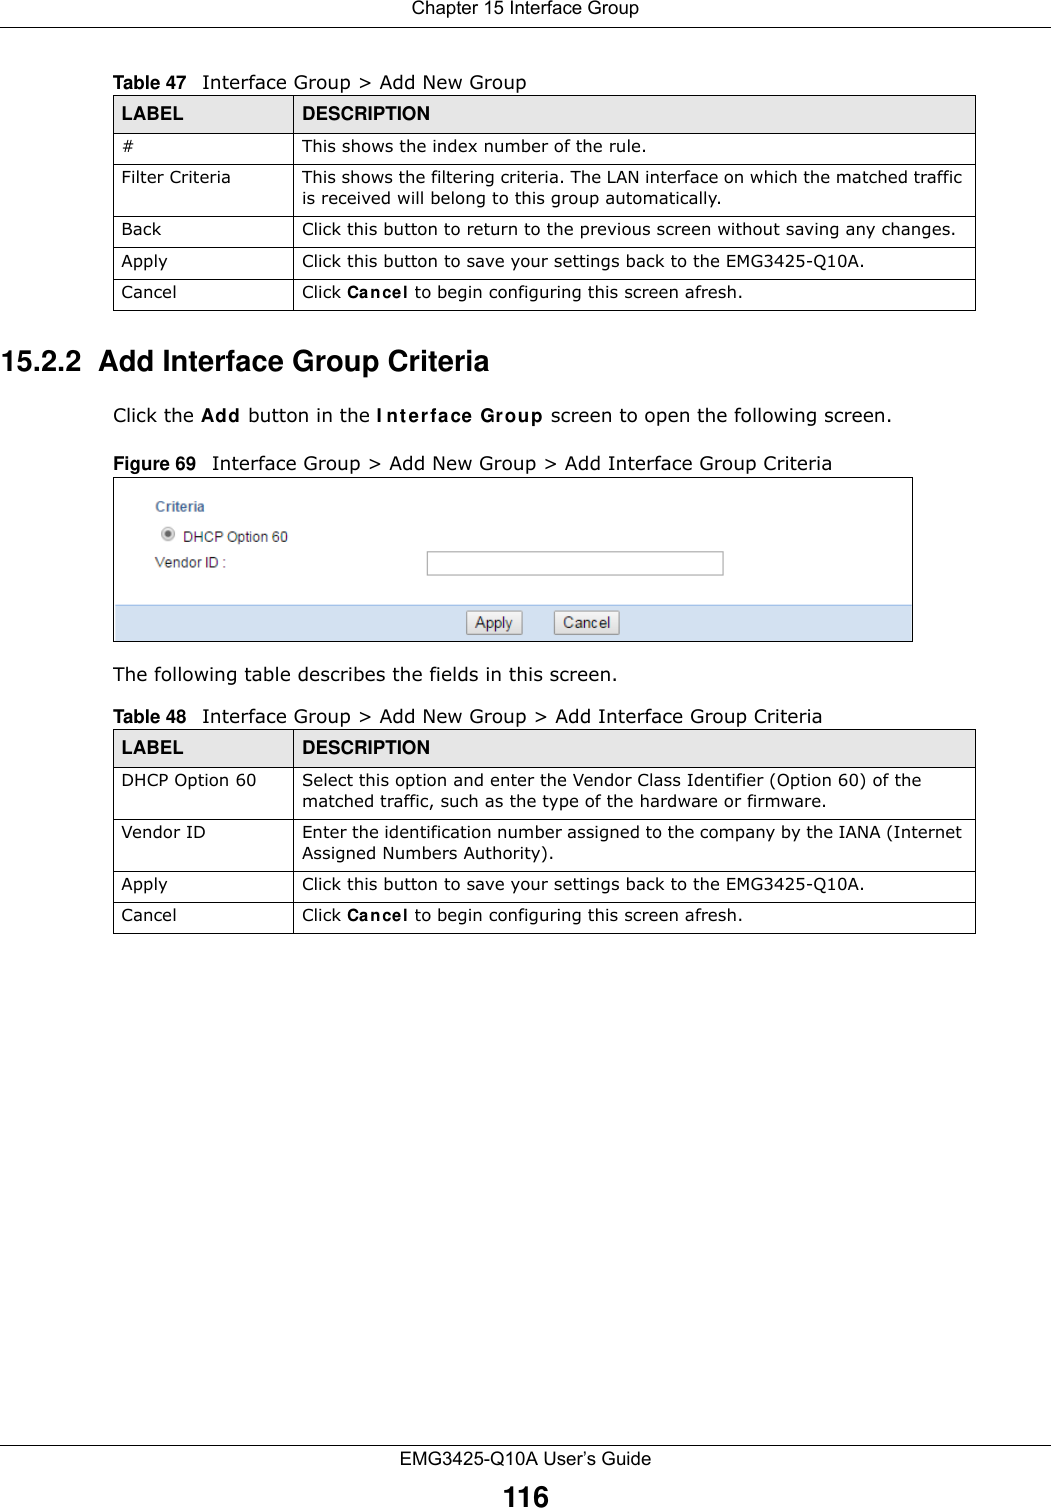 Chapter 15 Interface GroupEMG3425-Q10A User’s Guide11615.2.2  Add Interface Group CriteriaClick the Add button in the I nterface Grou p screen to open the following screen. Figure 69   Interface Group &gt; Add New Group &gt; Add Interface Group Criteria The following table describes the fields in this screen. #This shows the index number of the rule.Filter Criteria This shows the filtering criteria. The LAN interface on which the matched traffic is received will belong to this group automatically.Back Click this button to return to the previous screen without saving any changes.Apply Click this button to save your settings back to the EMG3425-Q10A.Cancel Click Can cel to begin configuring this screen afresh.Table 47   Interface Group &gt; Add New GroupLABEL DESCRIPTIONTable 48   Interface Group &gt; Add New Group &gt; Add Interface Group CriteriaLABEL DESCRIPTIONDHCP Option 60 Select this option and enter the Vendor Class Identifier (Option 60) of the matched traffic, such as the type of the hardware or firmware.Vendor ID Enter the identification number assigned to the company by the IANA (Internet Assigned Numbers Authority).Apply Click this button to save your settings back to the EMG3425-Q10A.Cancel Click Can cel to begin configuring this screen afresh.